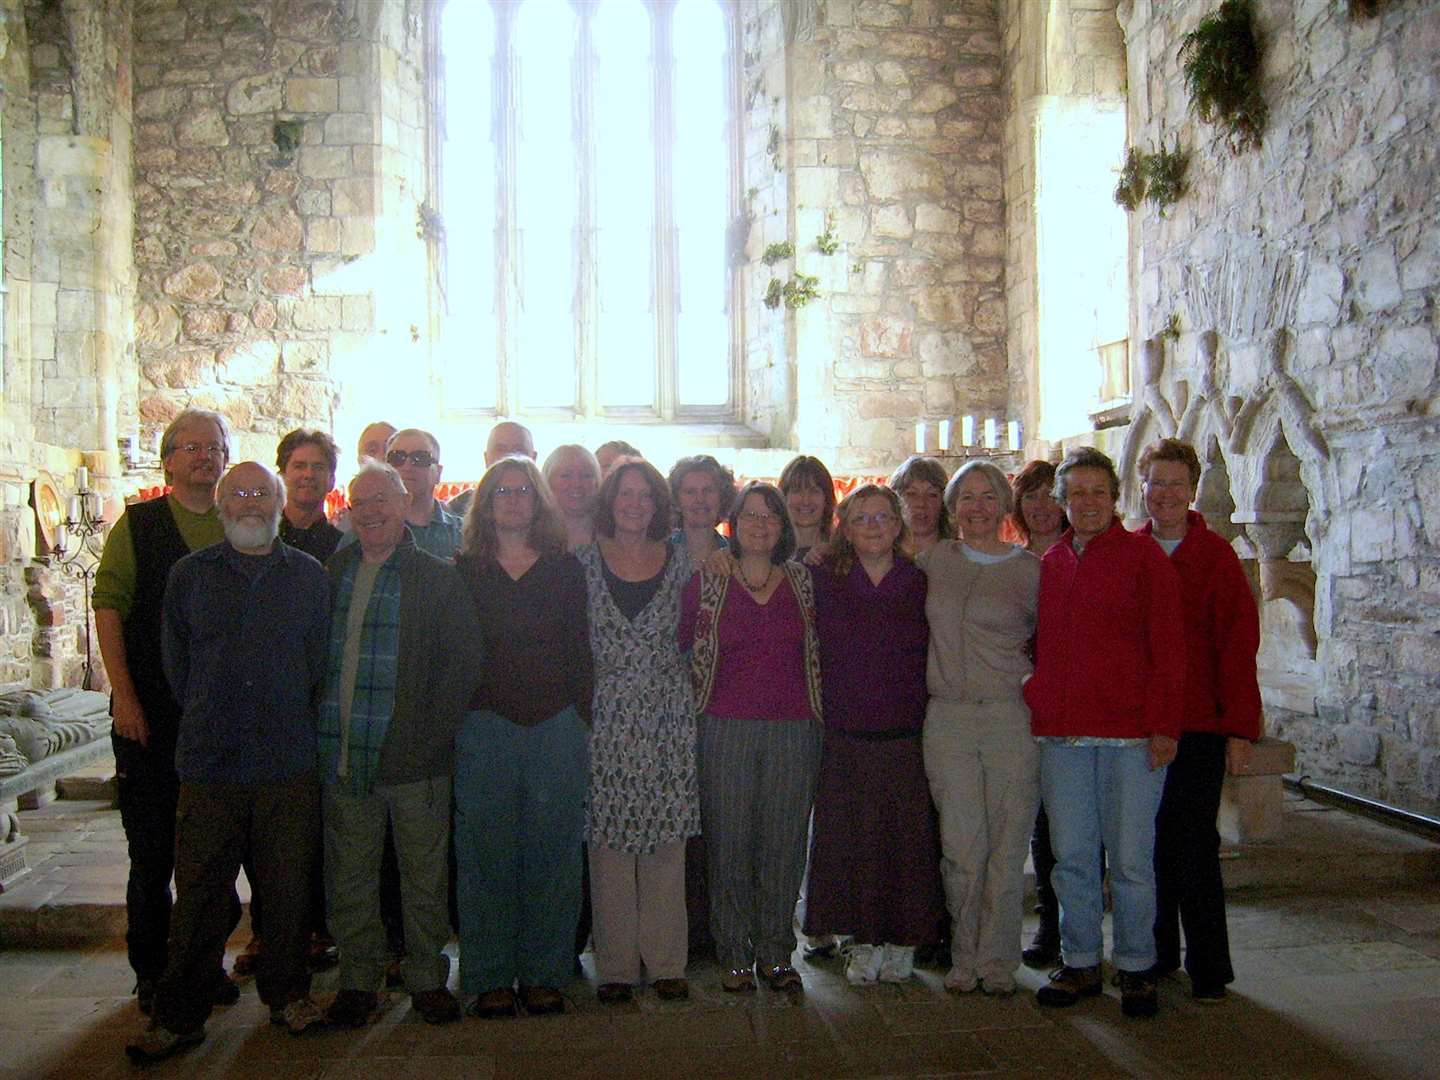 Forres Big Choir has sung five times in Iona Abbey including (pictured) in 2008.